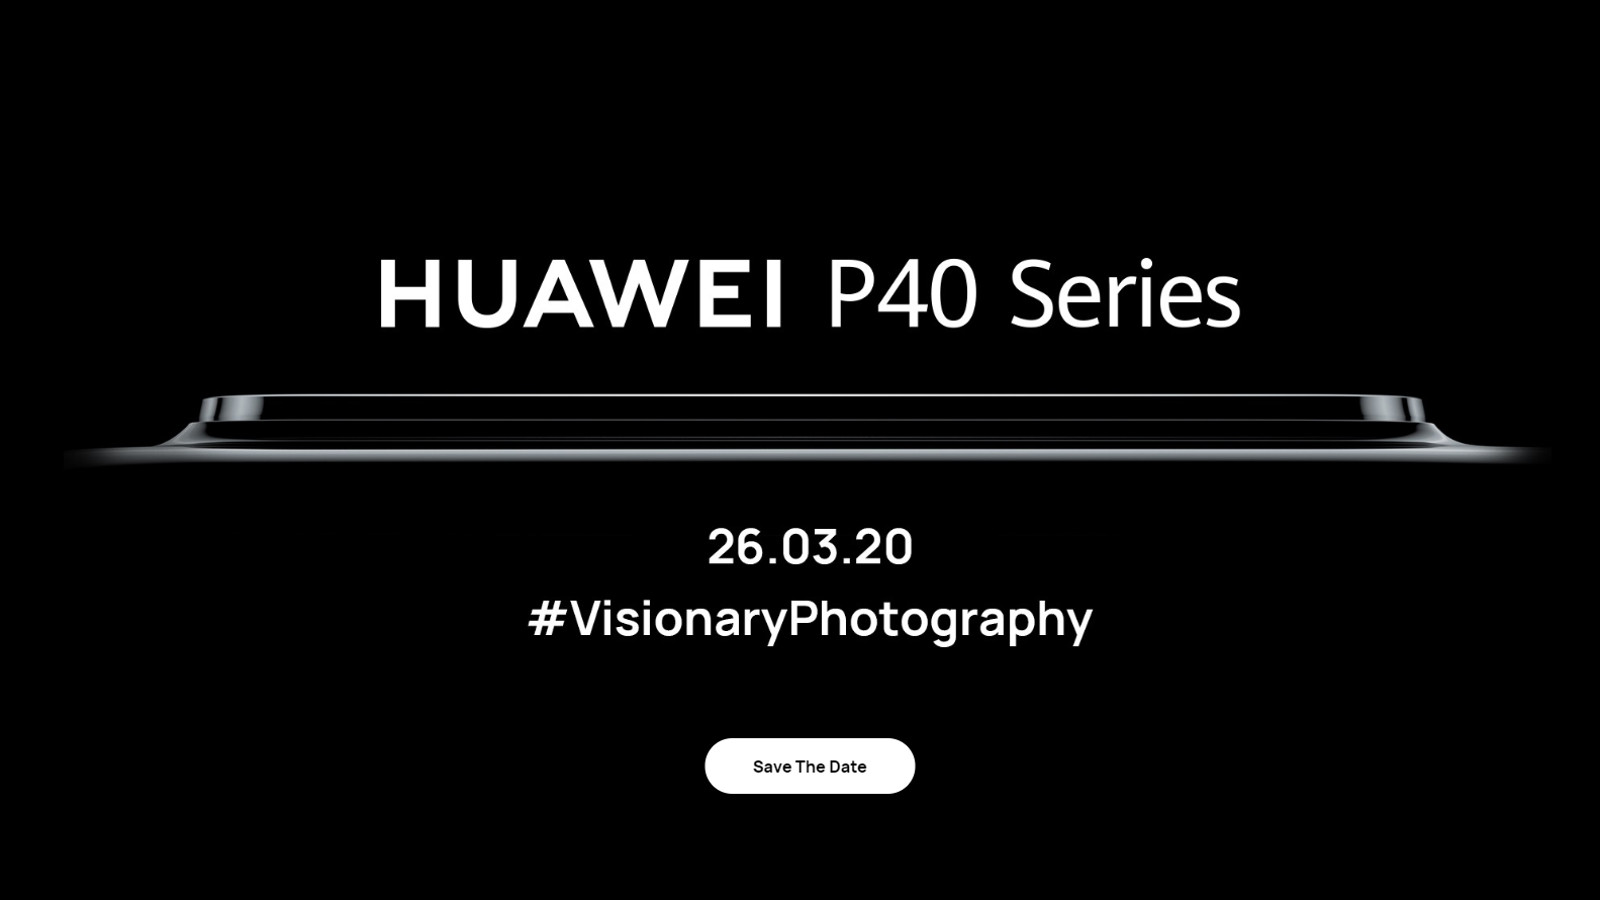 The HUAWEI P40 series teaser banner.